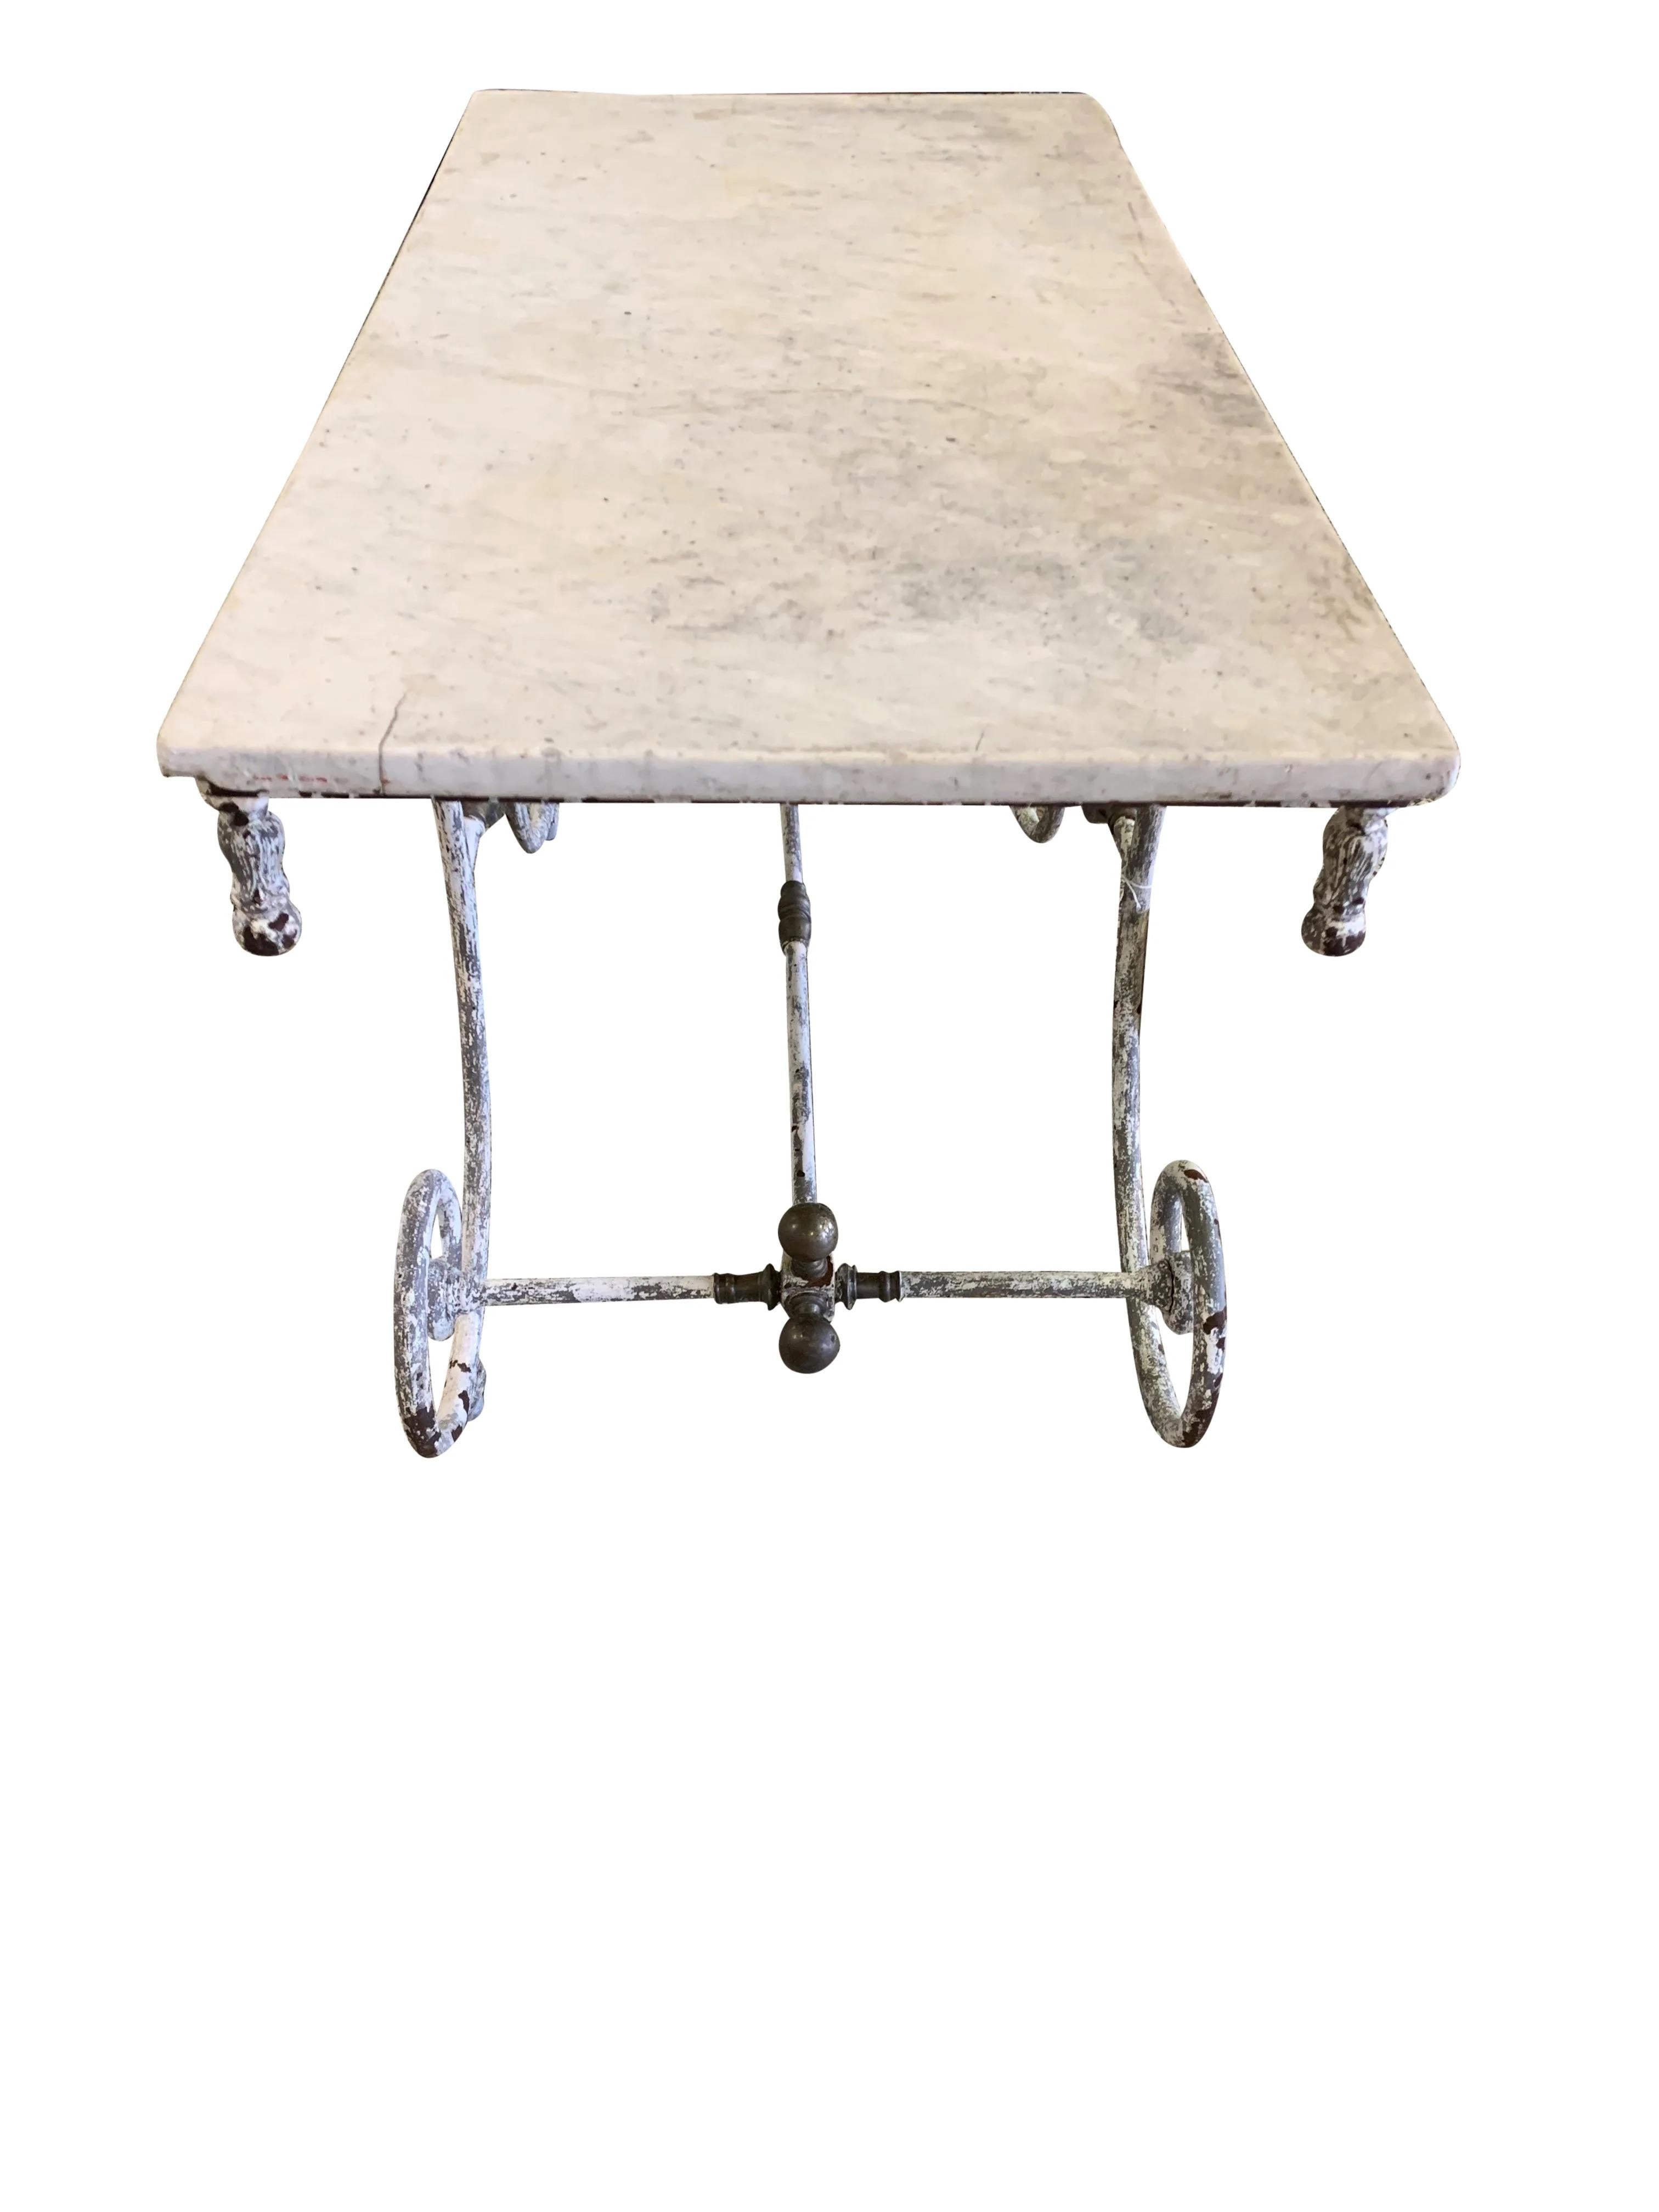 A gorgeous 19th century French marble top pastry table featuring old white painted patina on the iron base. This beauty features decorative brass hardware with patina and a white veined marble top. Ideal for use as a kitchen island or could also